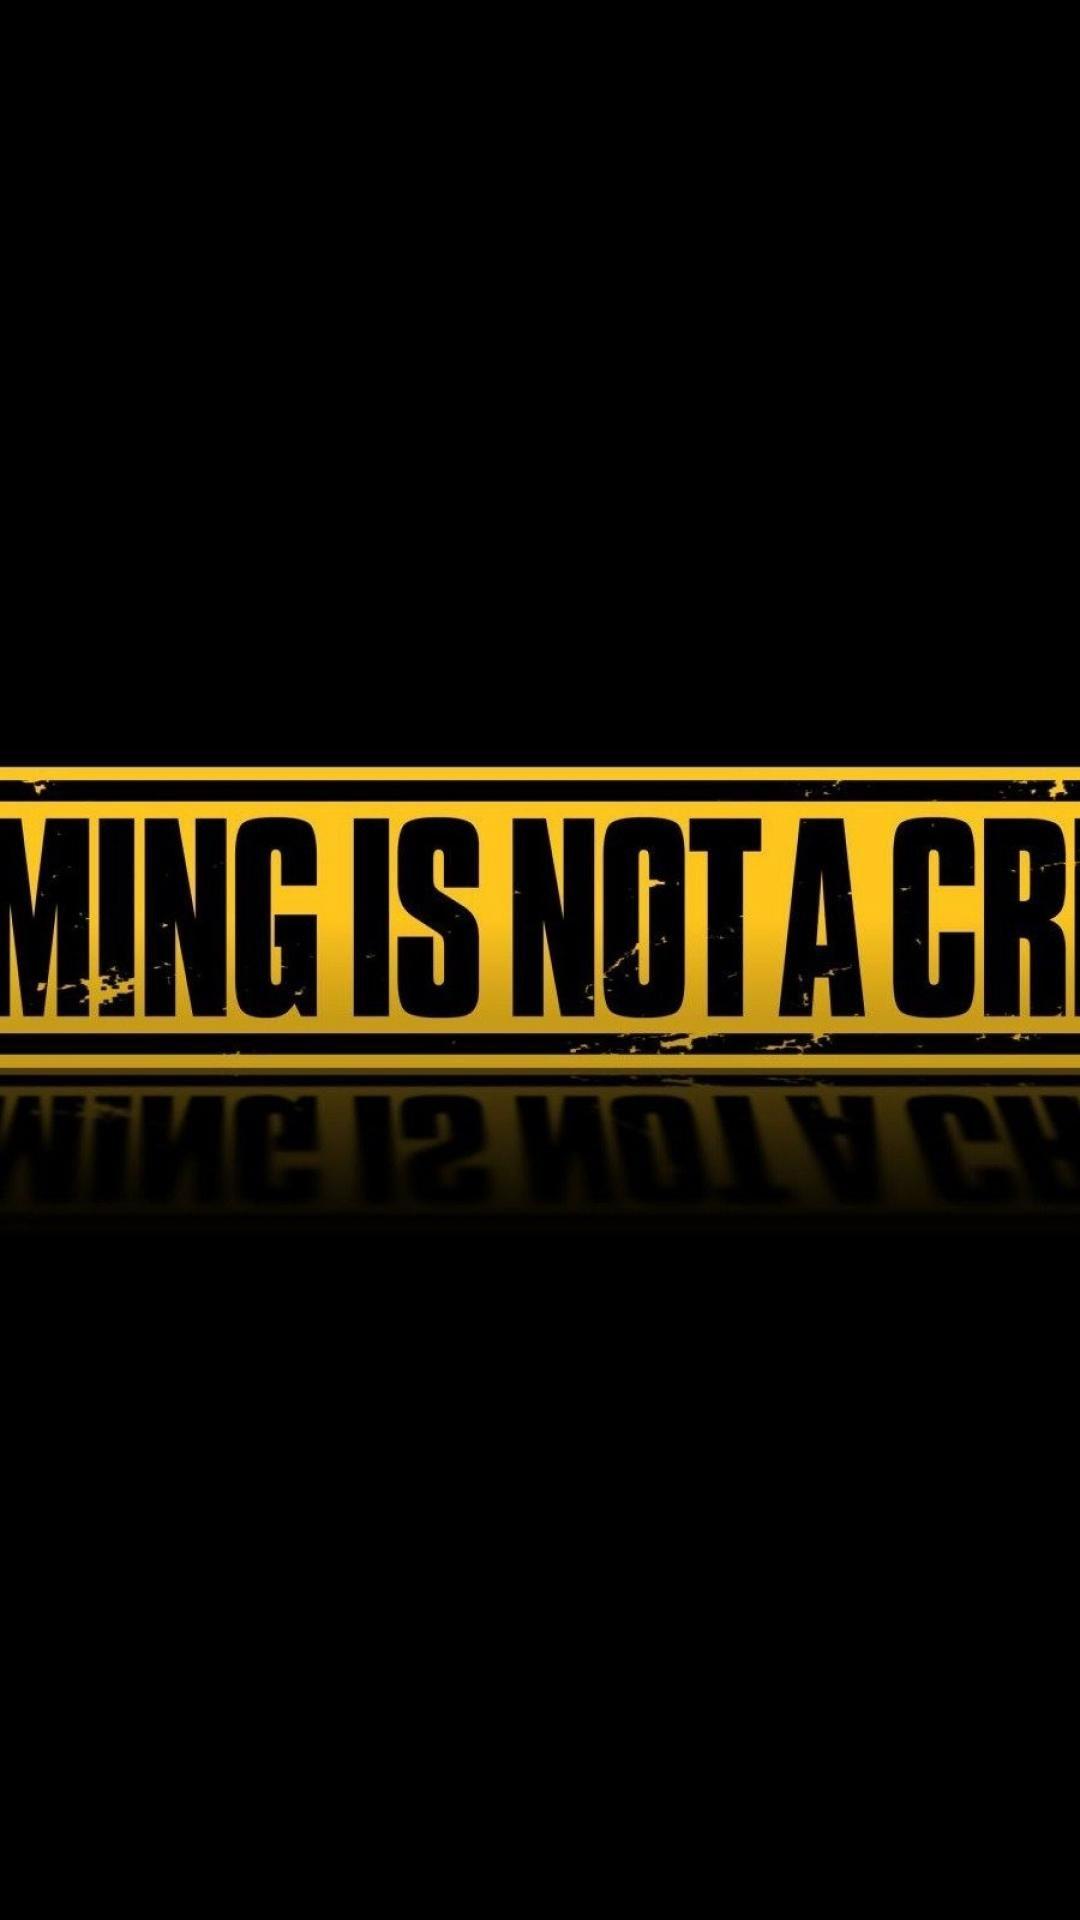 Black background crime gaming text wallpaper